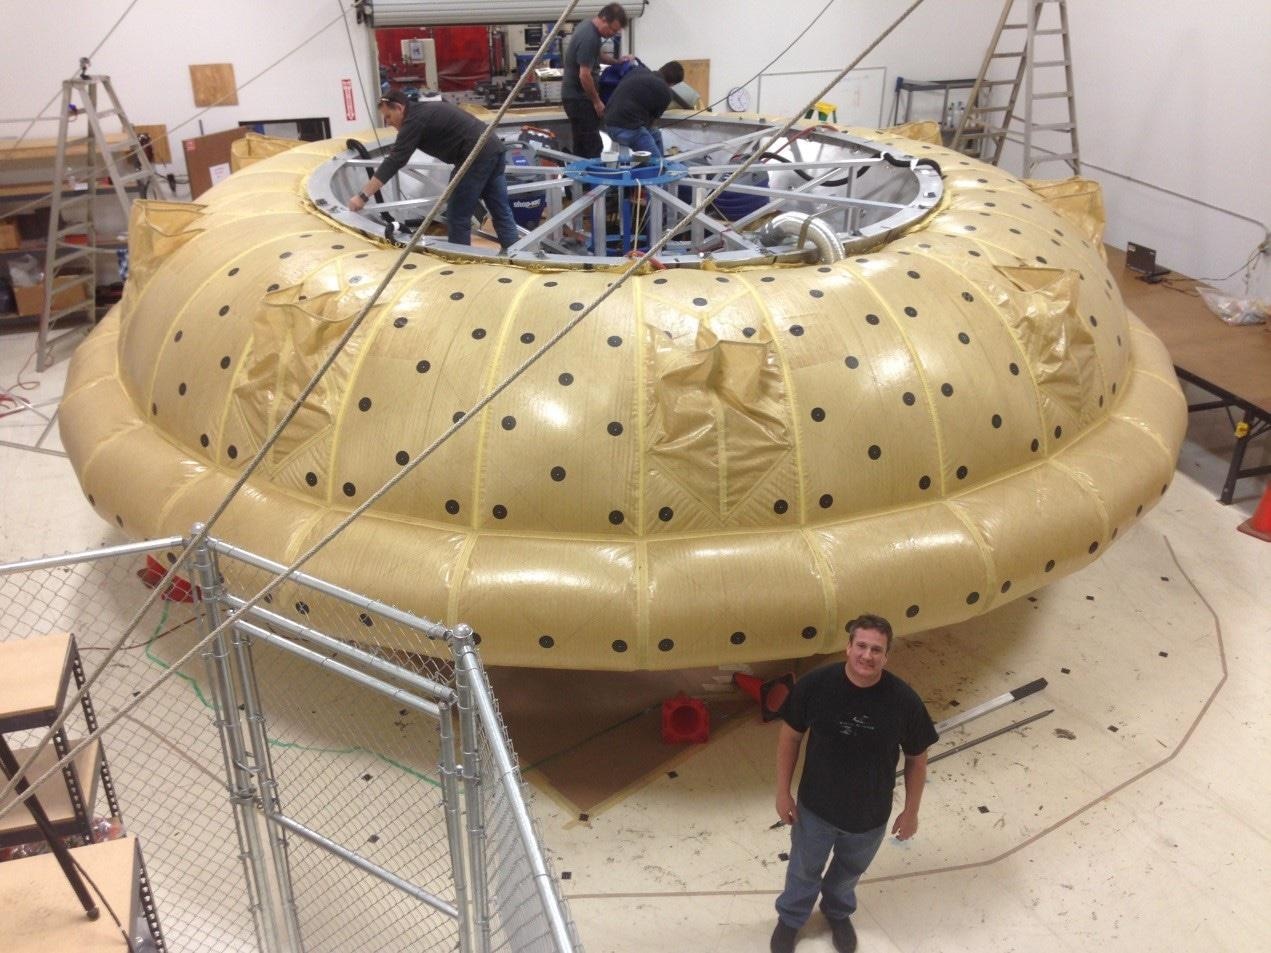 MID-MOUNTAIN’S COATED FABRIC FOR SIAD-E (supersonic inflatable aerodynamic decelerator) for NASA LDSD program (low density supersonic decelerator)